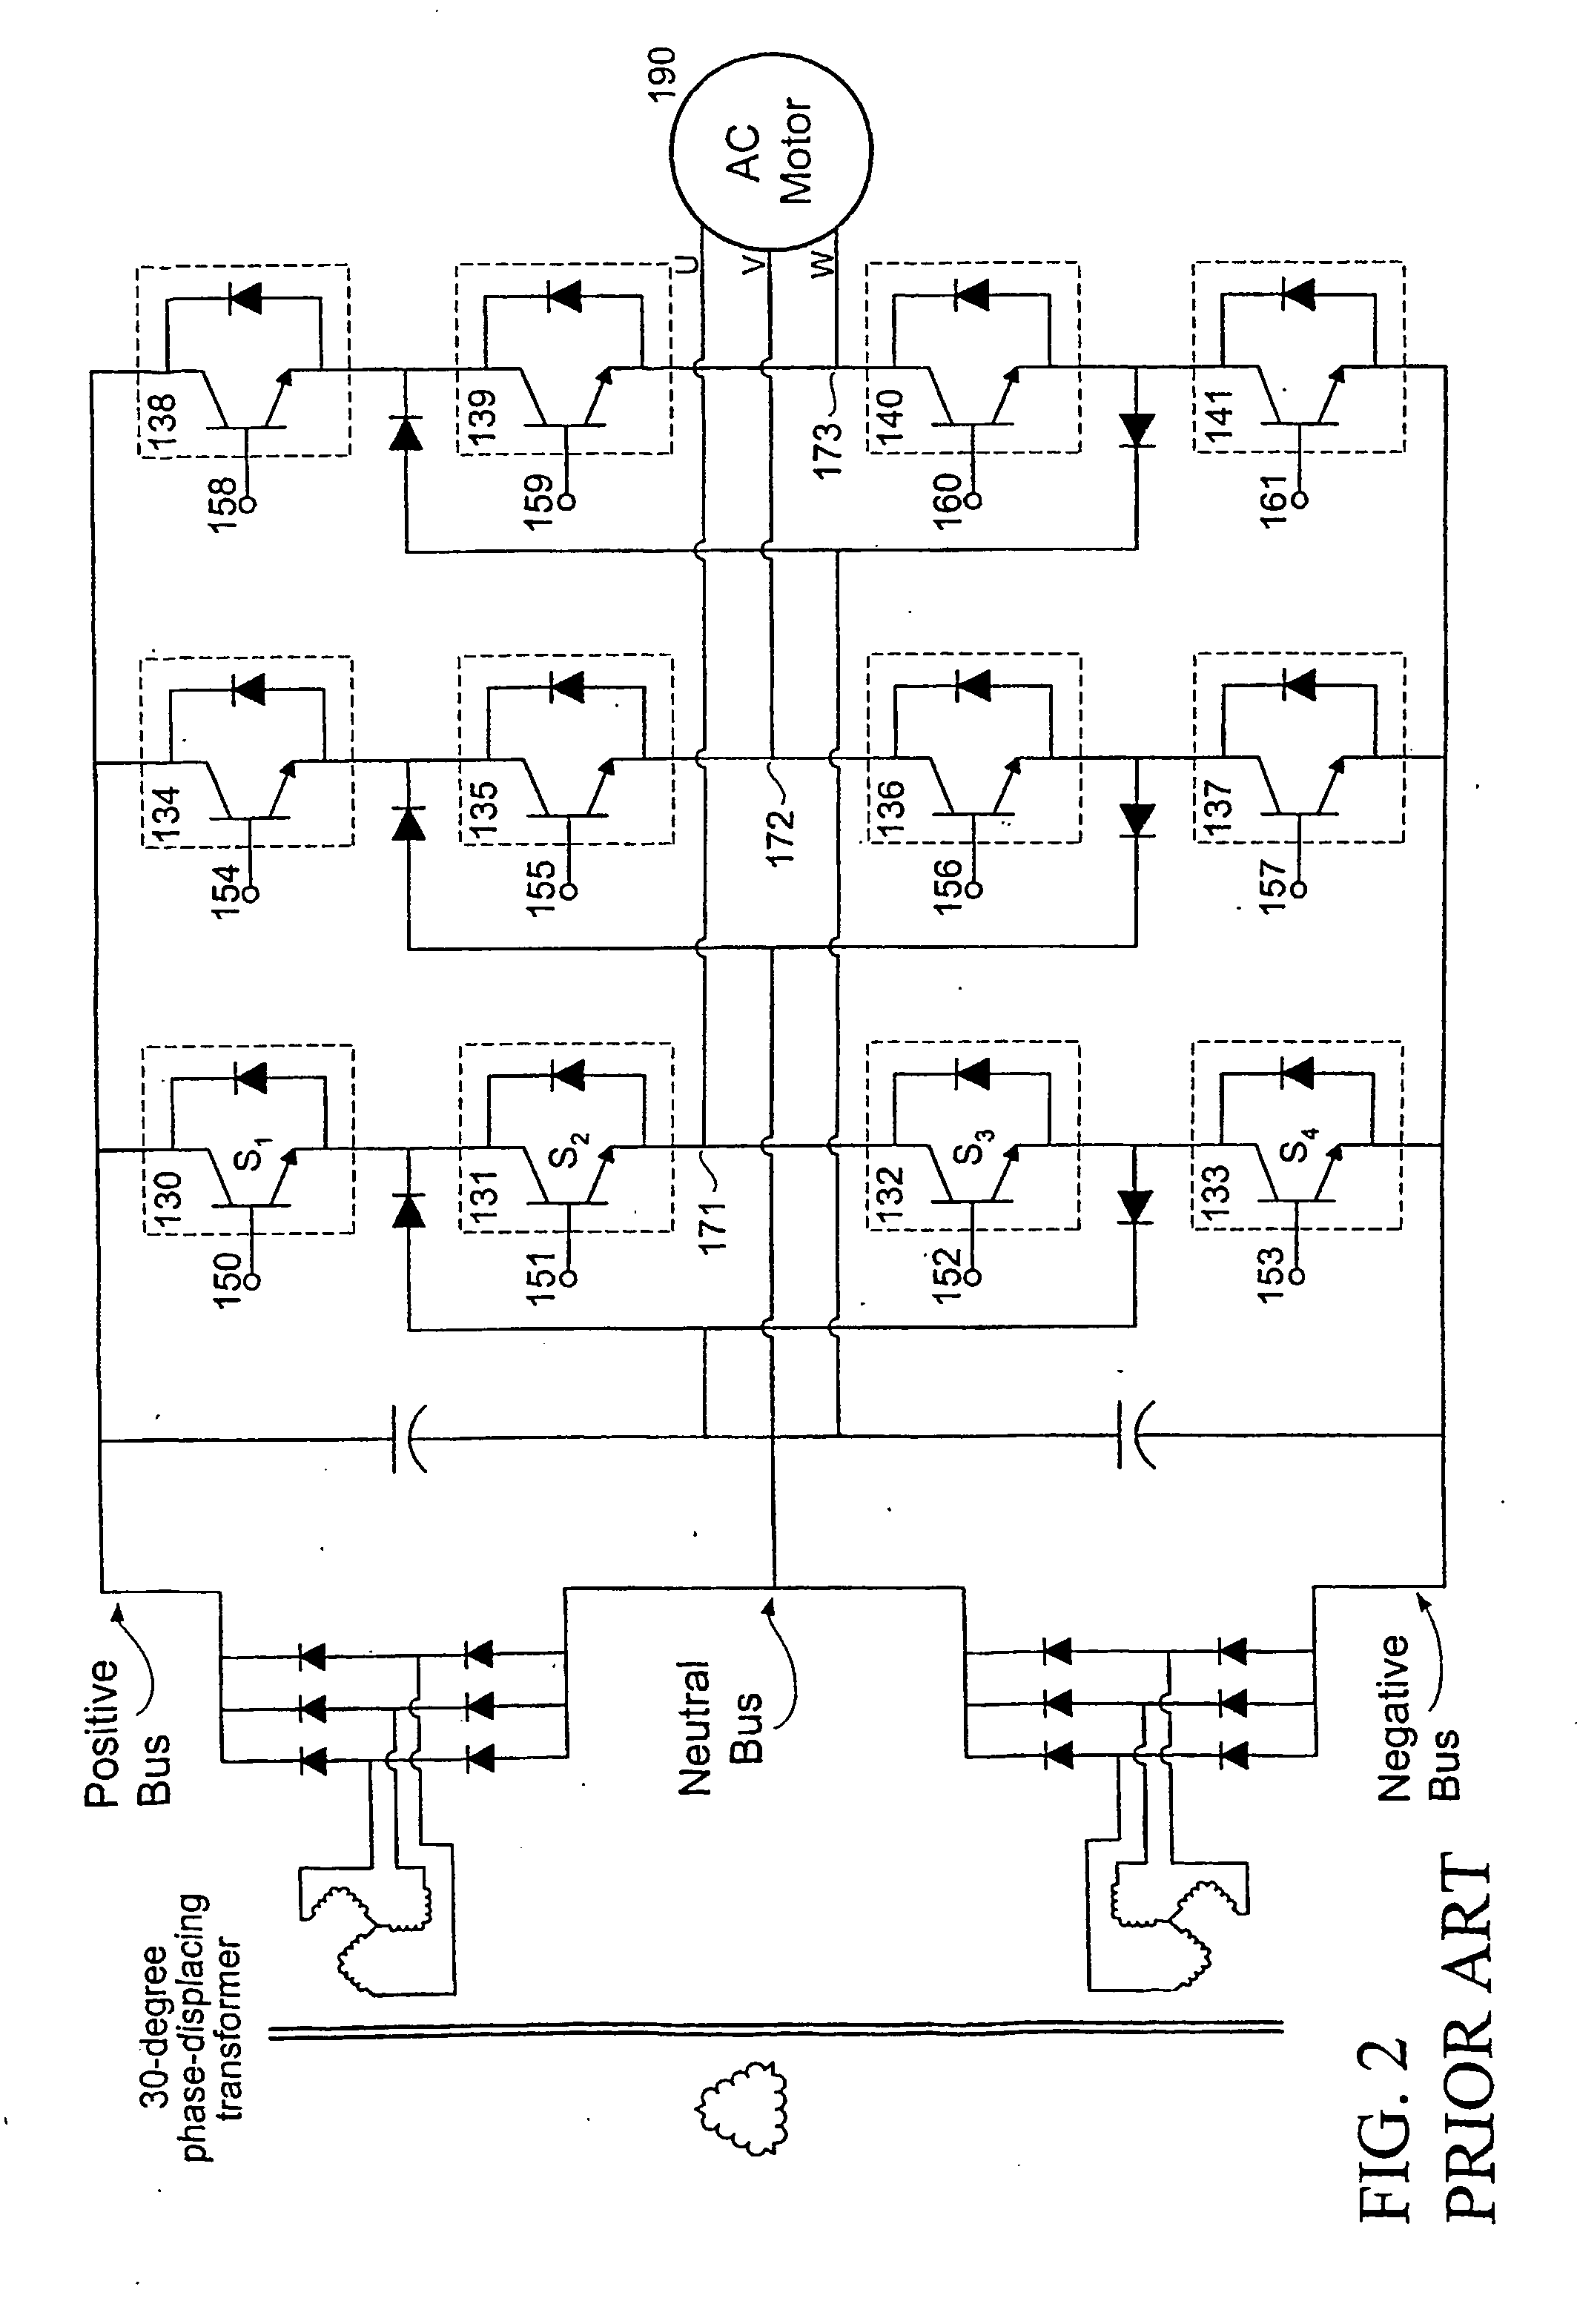 Low voltage, two-level, six-pulse induction motor controller driving a medium-to-high voltage, three-or-more-level ac drive inverter bridge